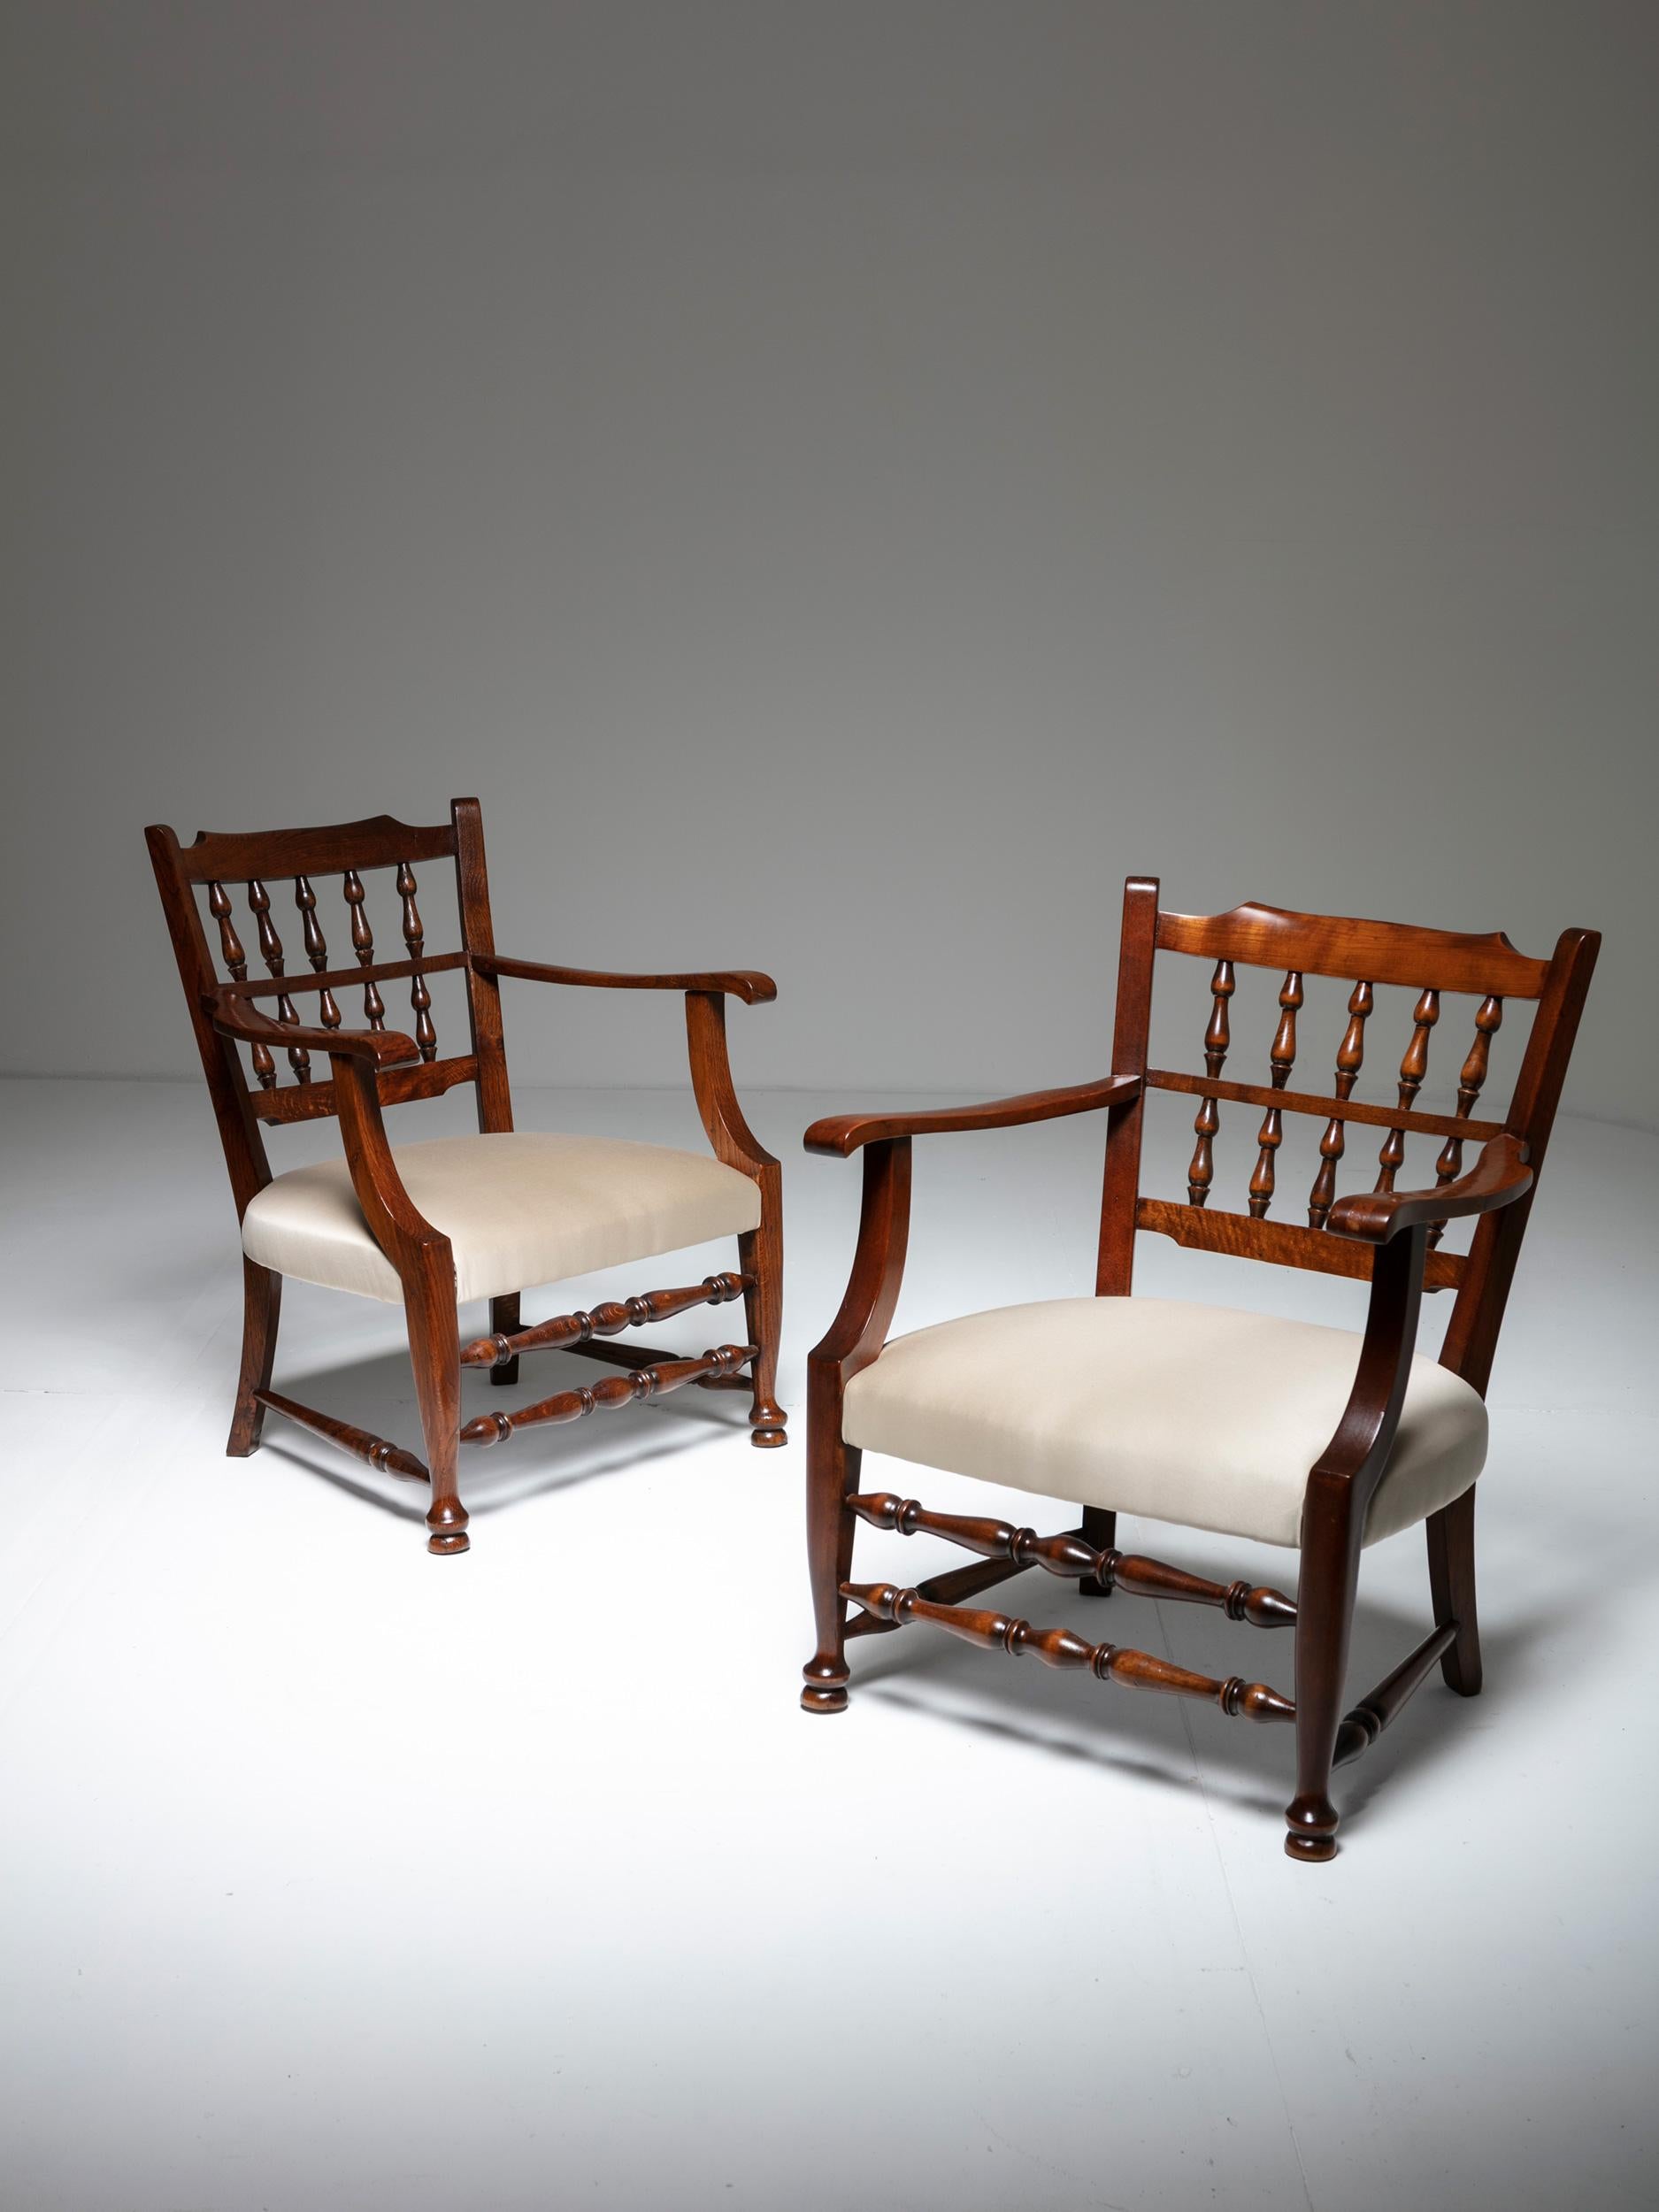 Mid 1930s armchairs by Tomaso Buzzi.
Literature and provenance available upon request.